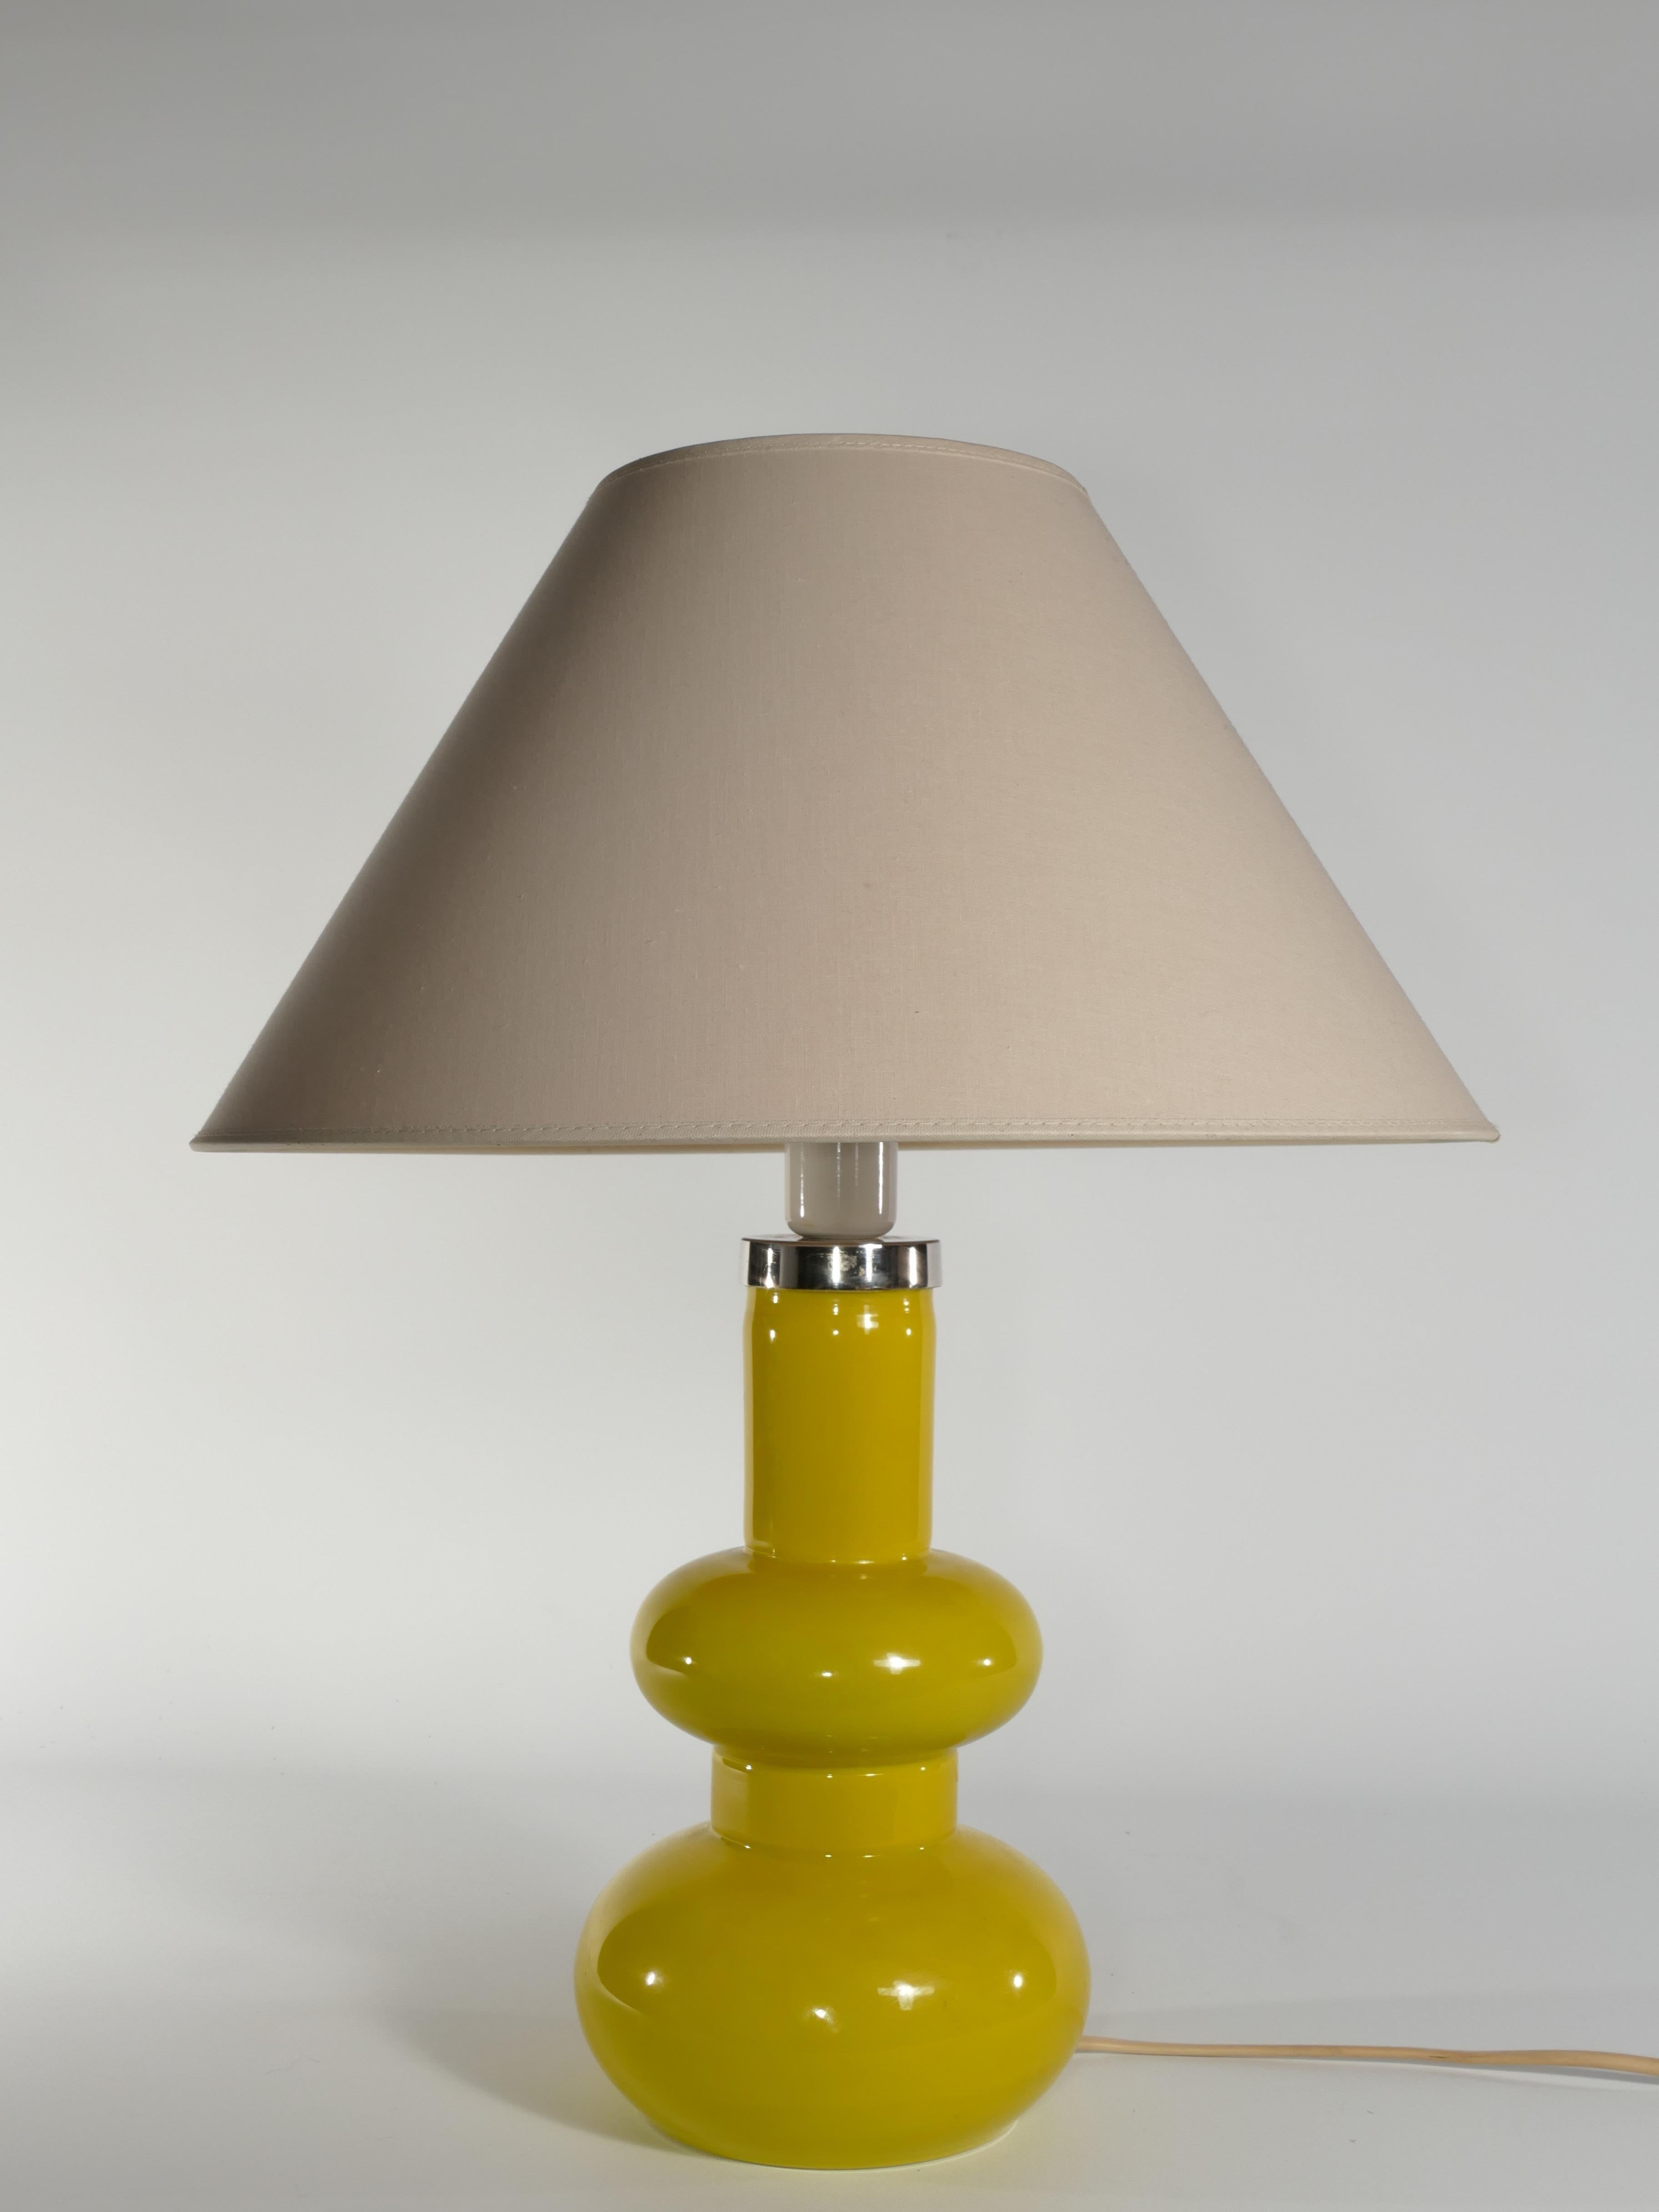 Swedish Mid-Century Modern Curvaceous Bright Yellow Glass Table Lamp by Orrefors, 1960s For Sale